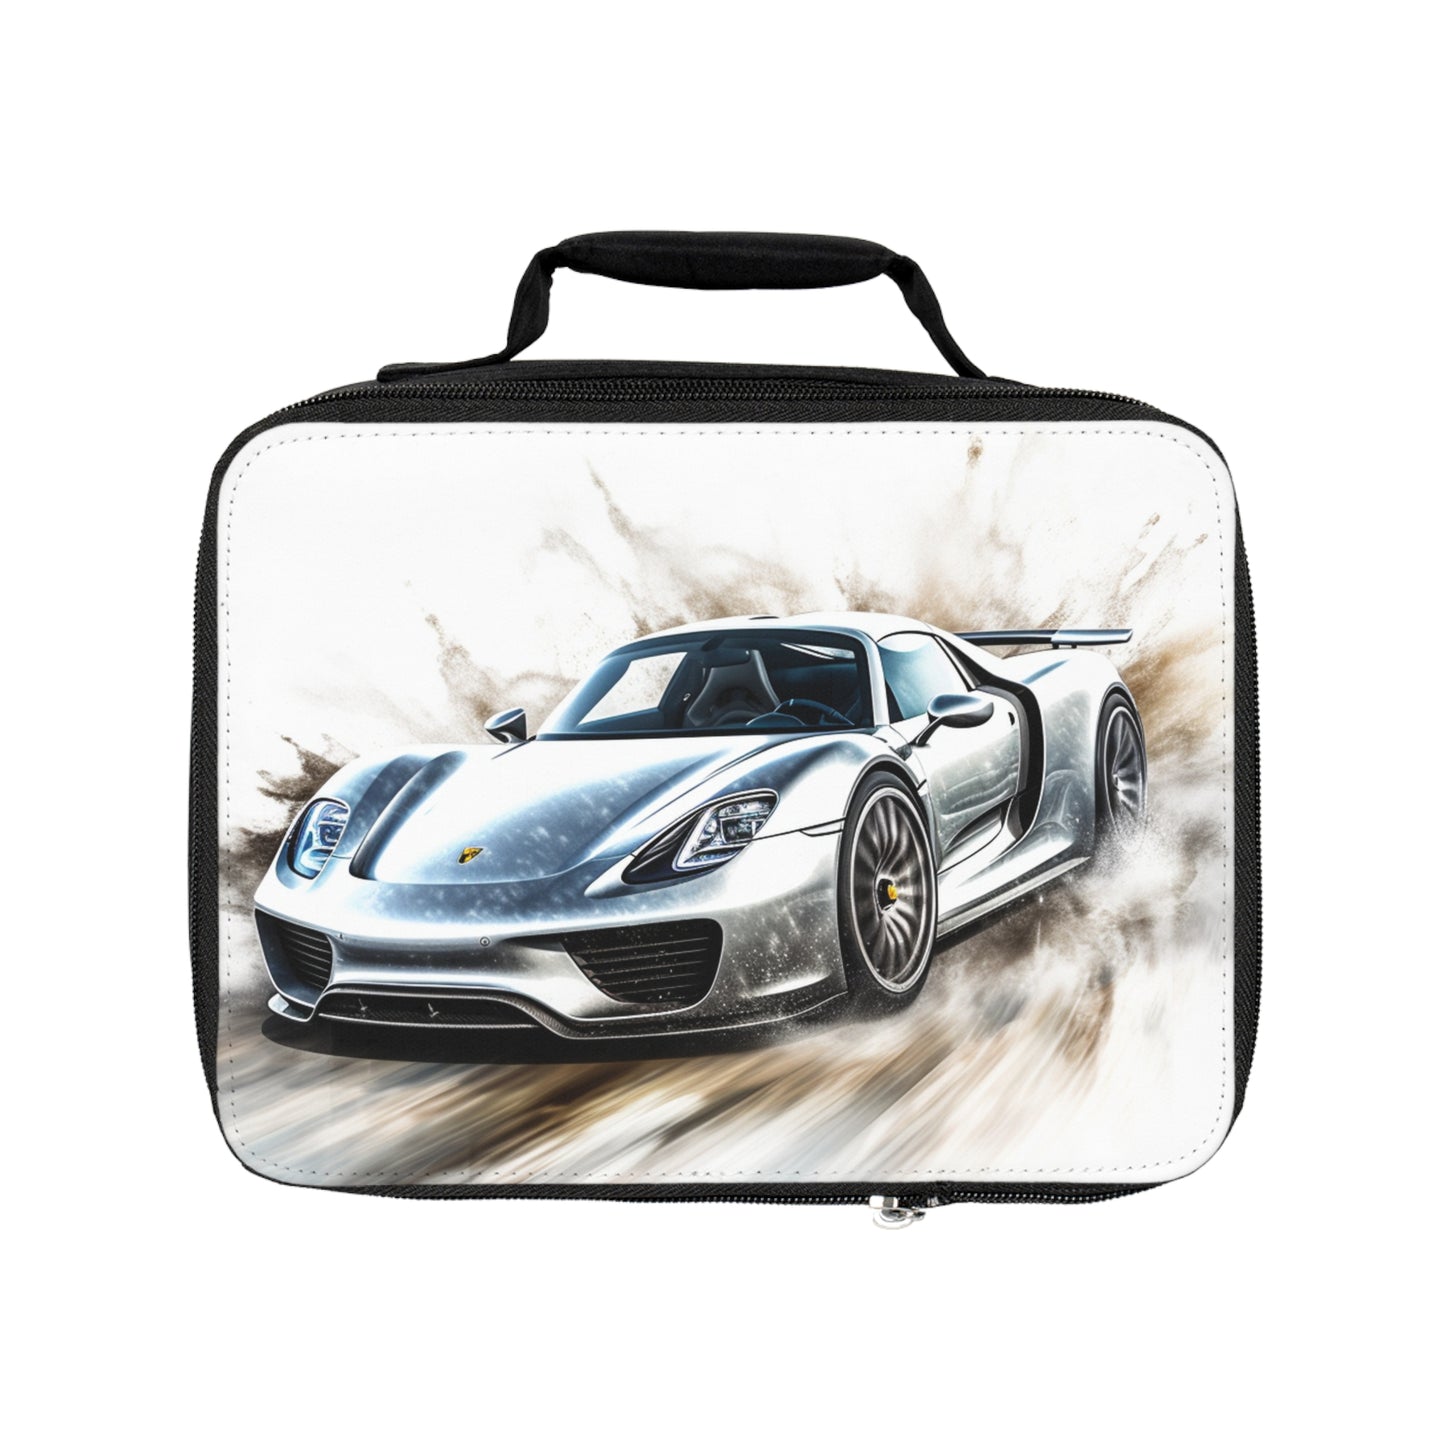 Lunch Bag 918 Spyder white background driving fast with water splashing 2